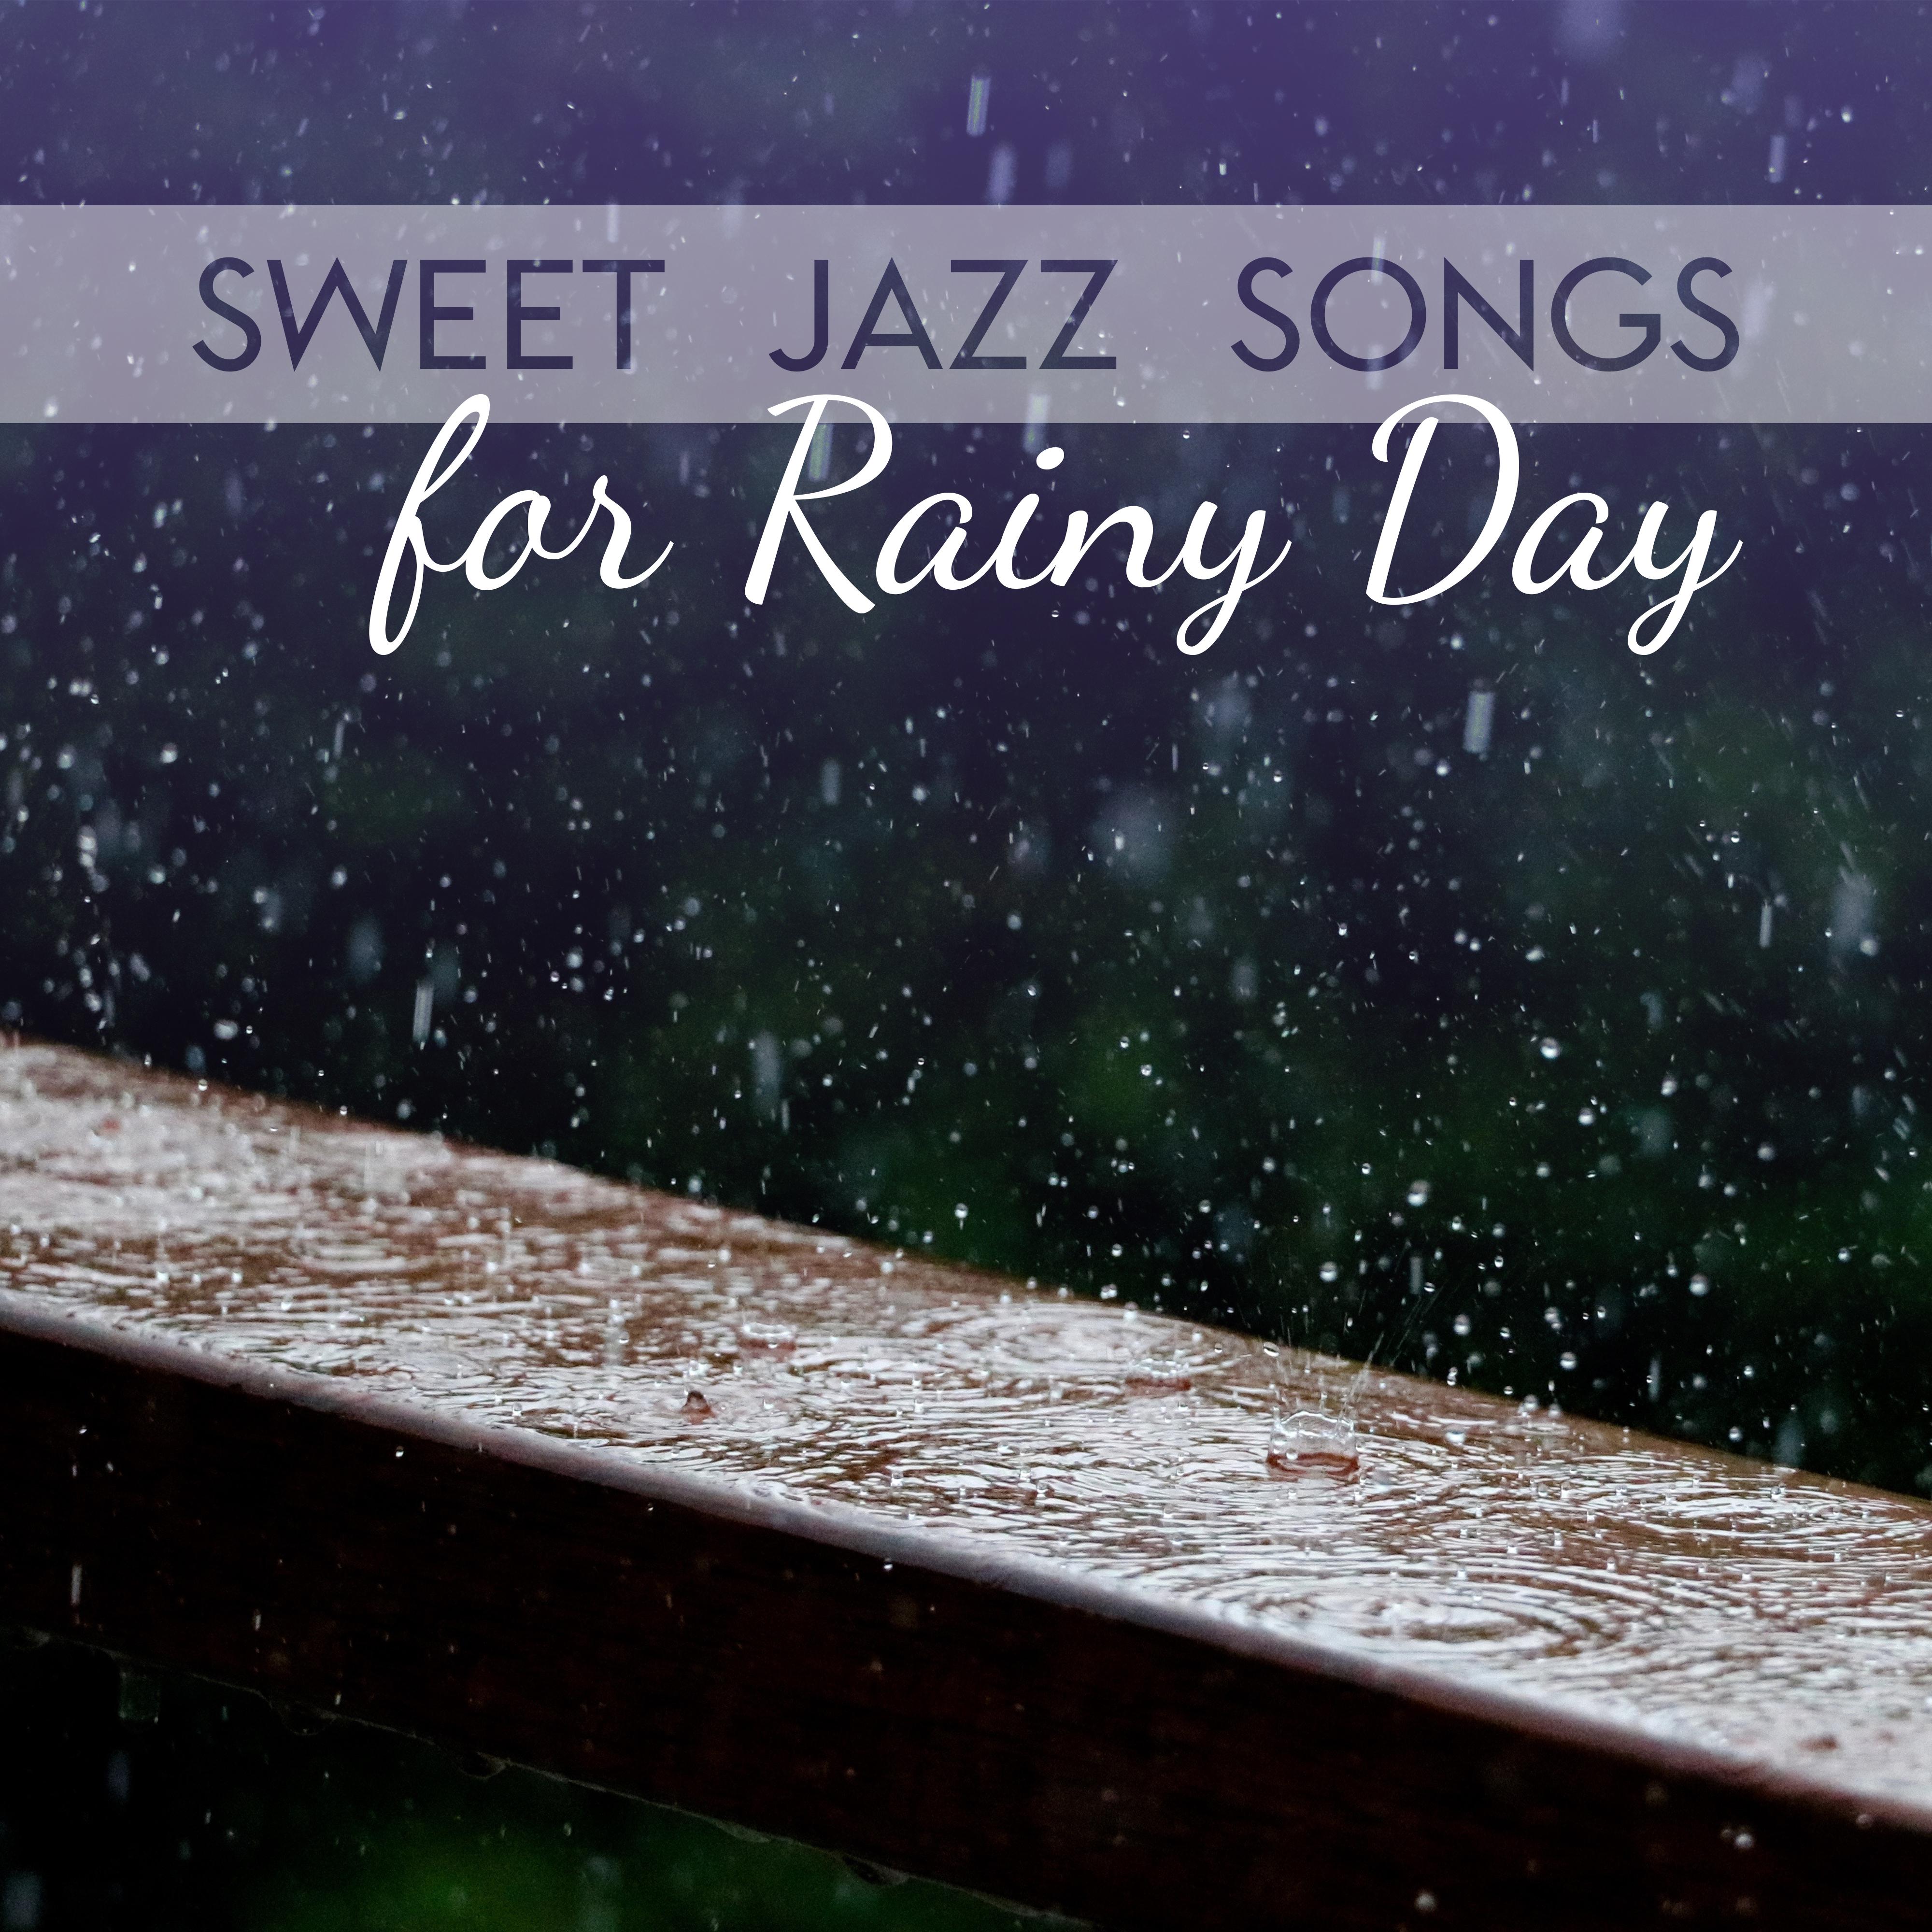 Sweet Jazz Songs for Rainy Day  Soothing Jazz Music, Music for Autumn Evenings, Melancholy Time with  Jazz Songs